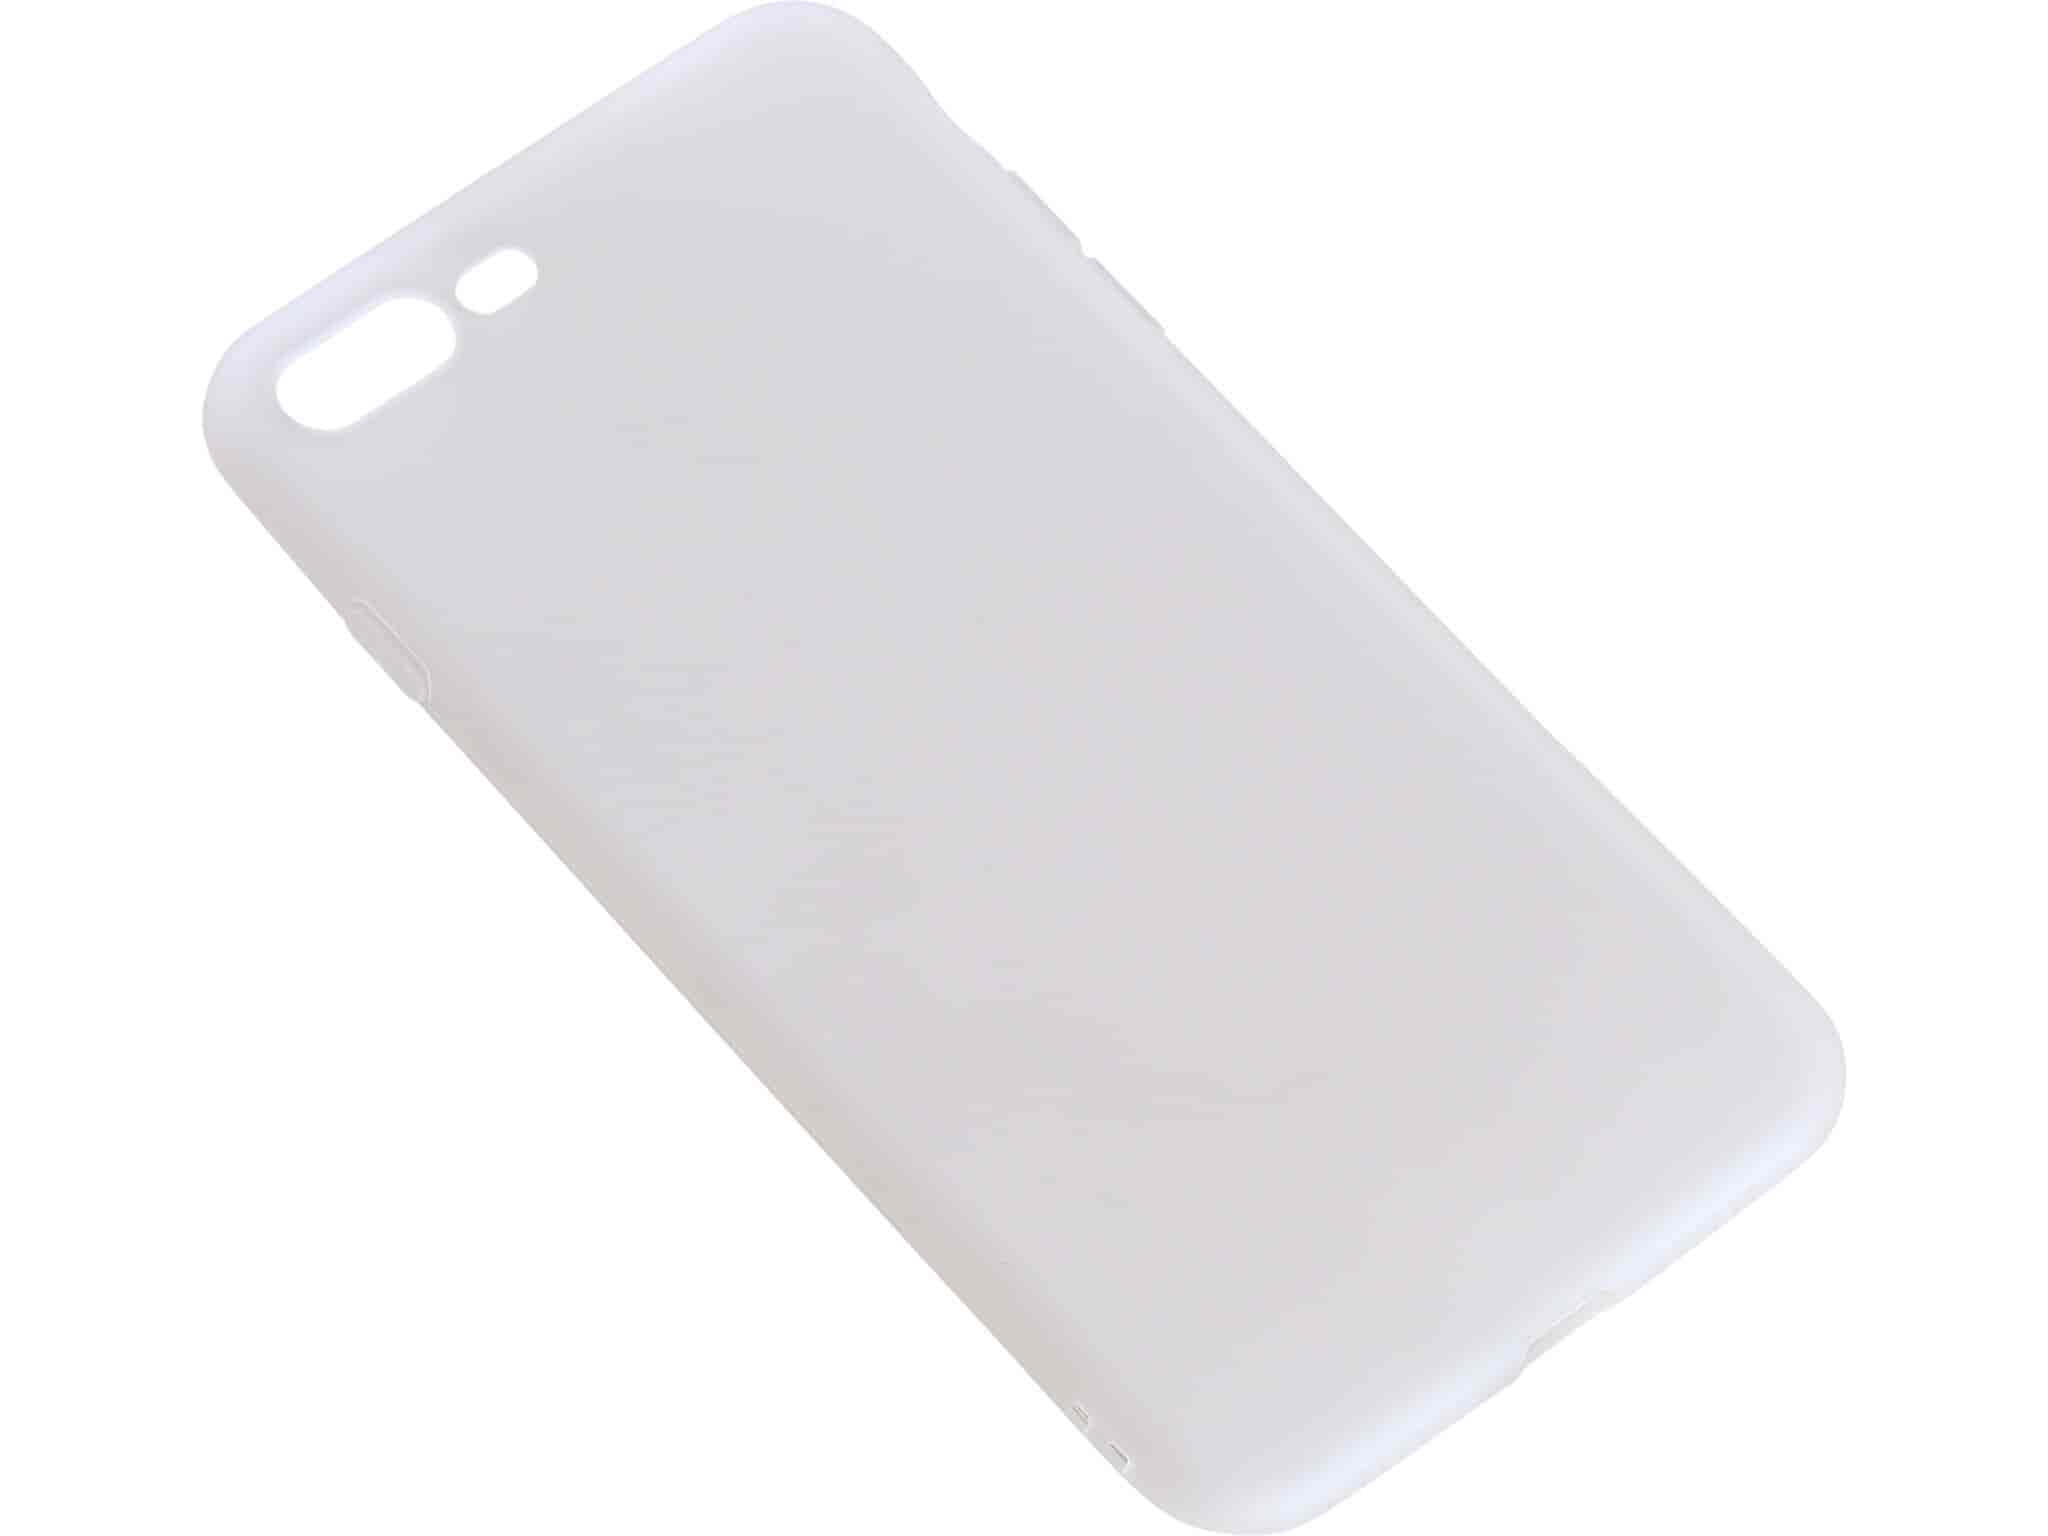 Cover for iPhone 7/8 Plus soft White, SandbergA Sandberg Design Cover effectively protects your phone against marks and scratches while also giving it a more personal look.Sandberg